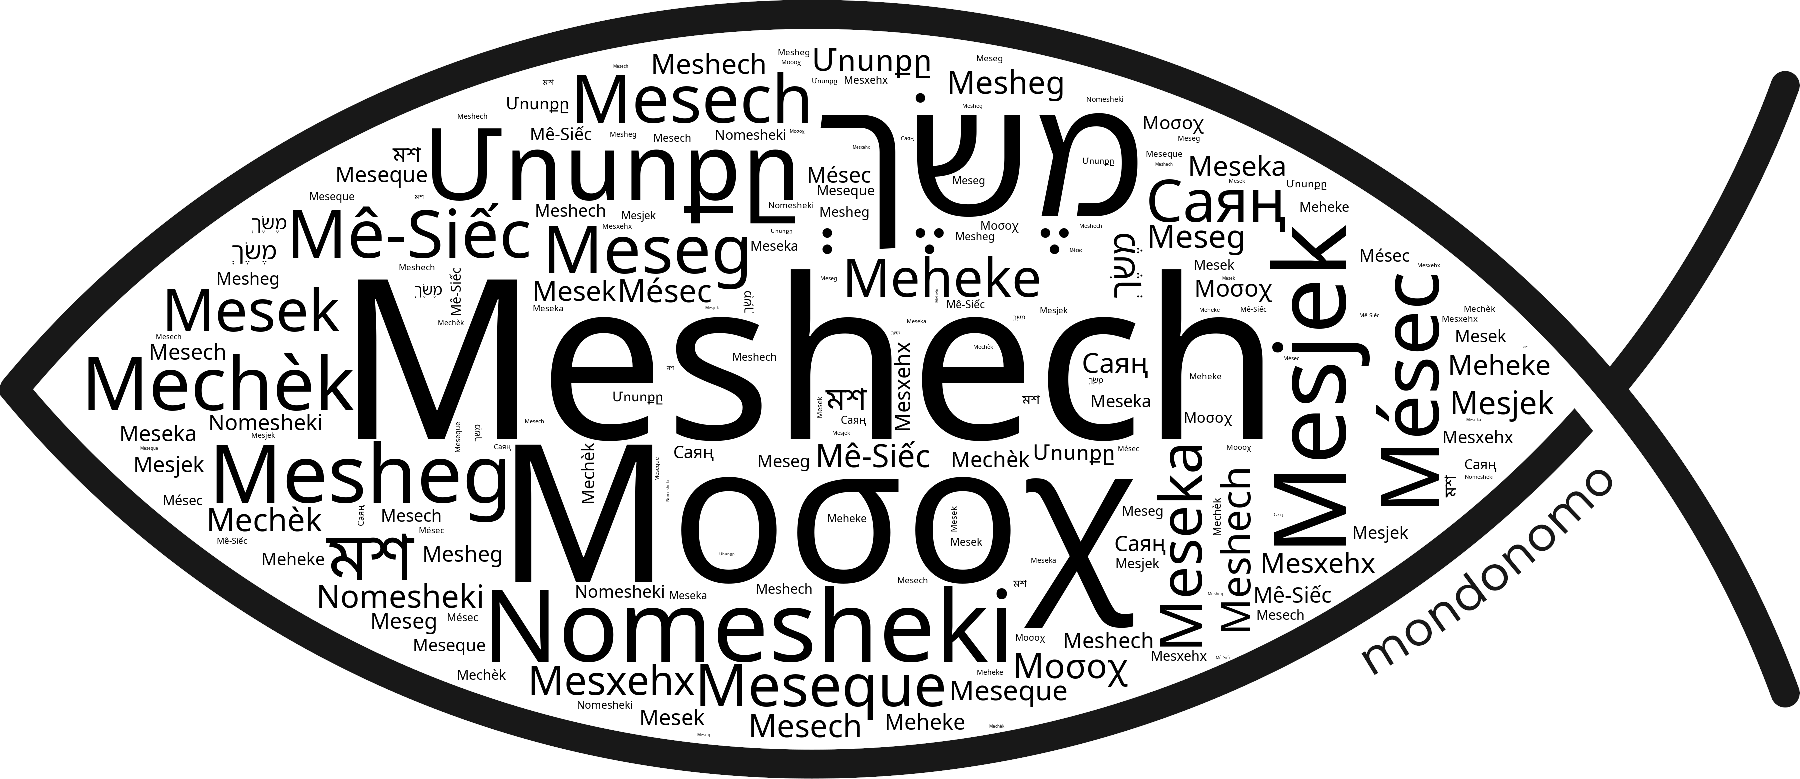 Name Meshech in the world's Bibles